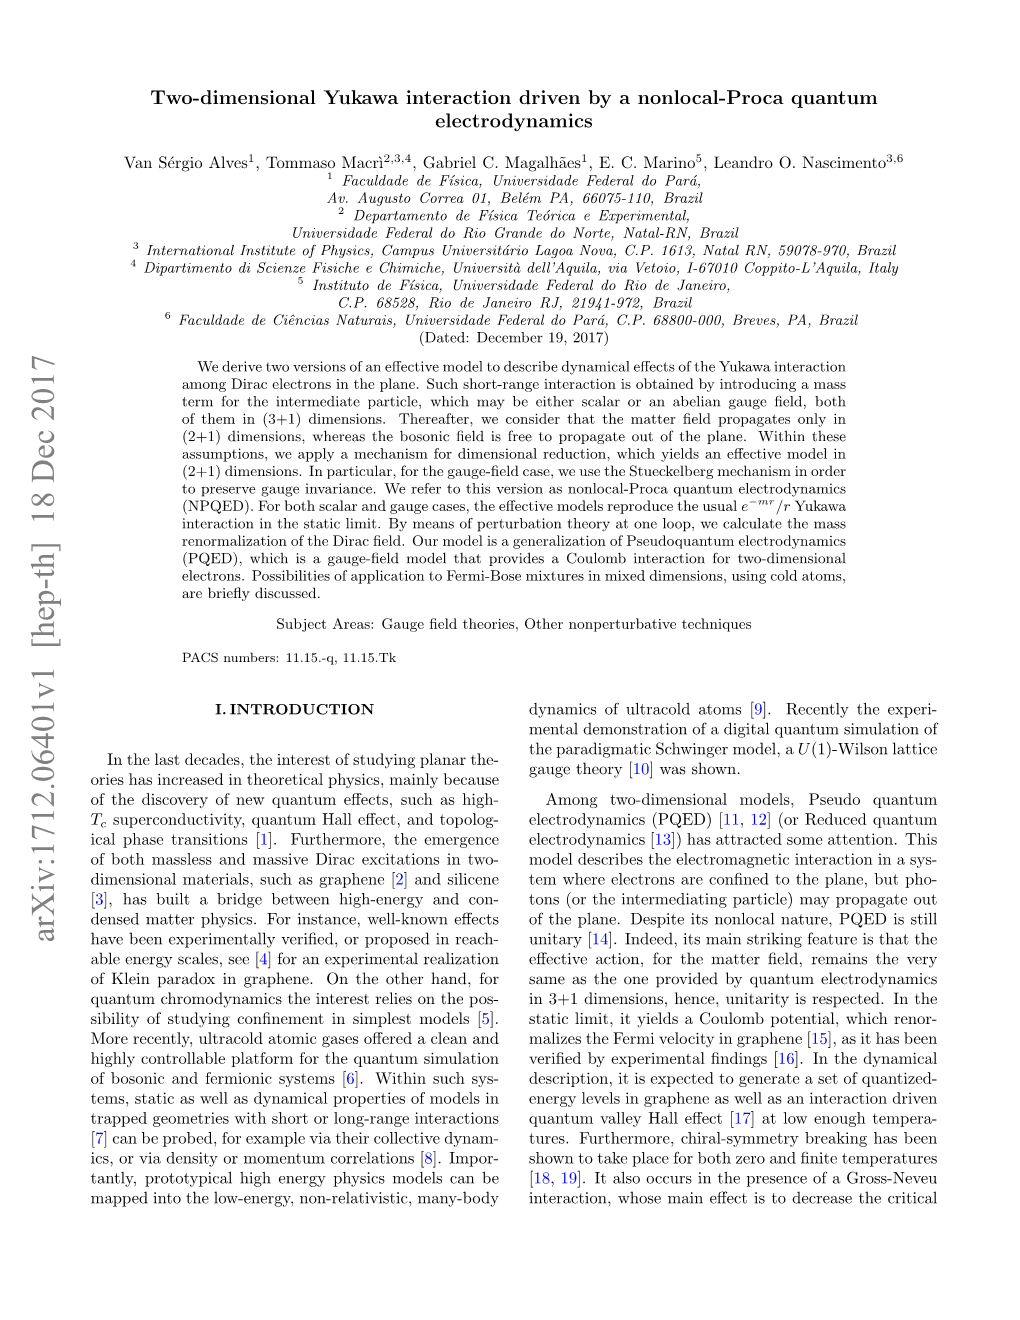 Arxiv:1712.06401V1 [Hep-Th] 18 Dec 2017 Have Been Experimentally Veriﬁed, Or Proposed in Reach- Unitary [14]